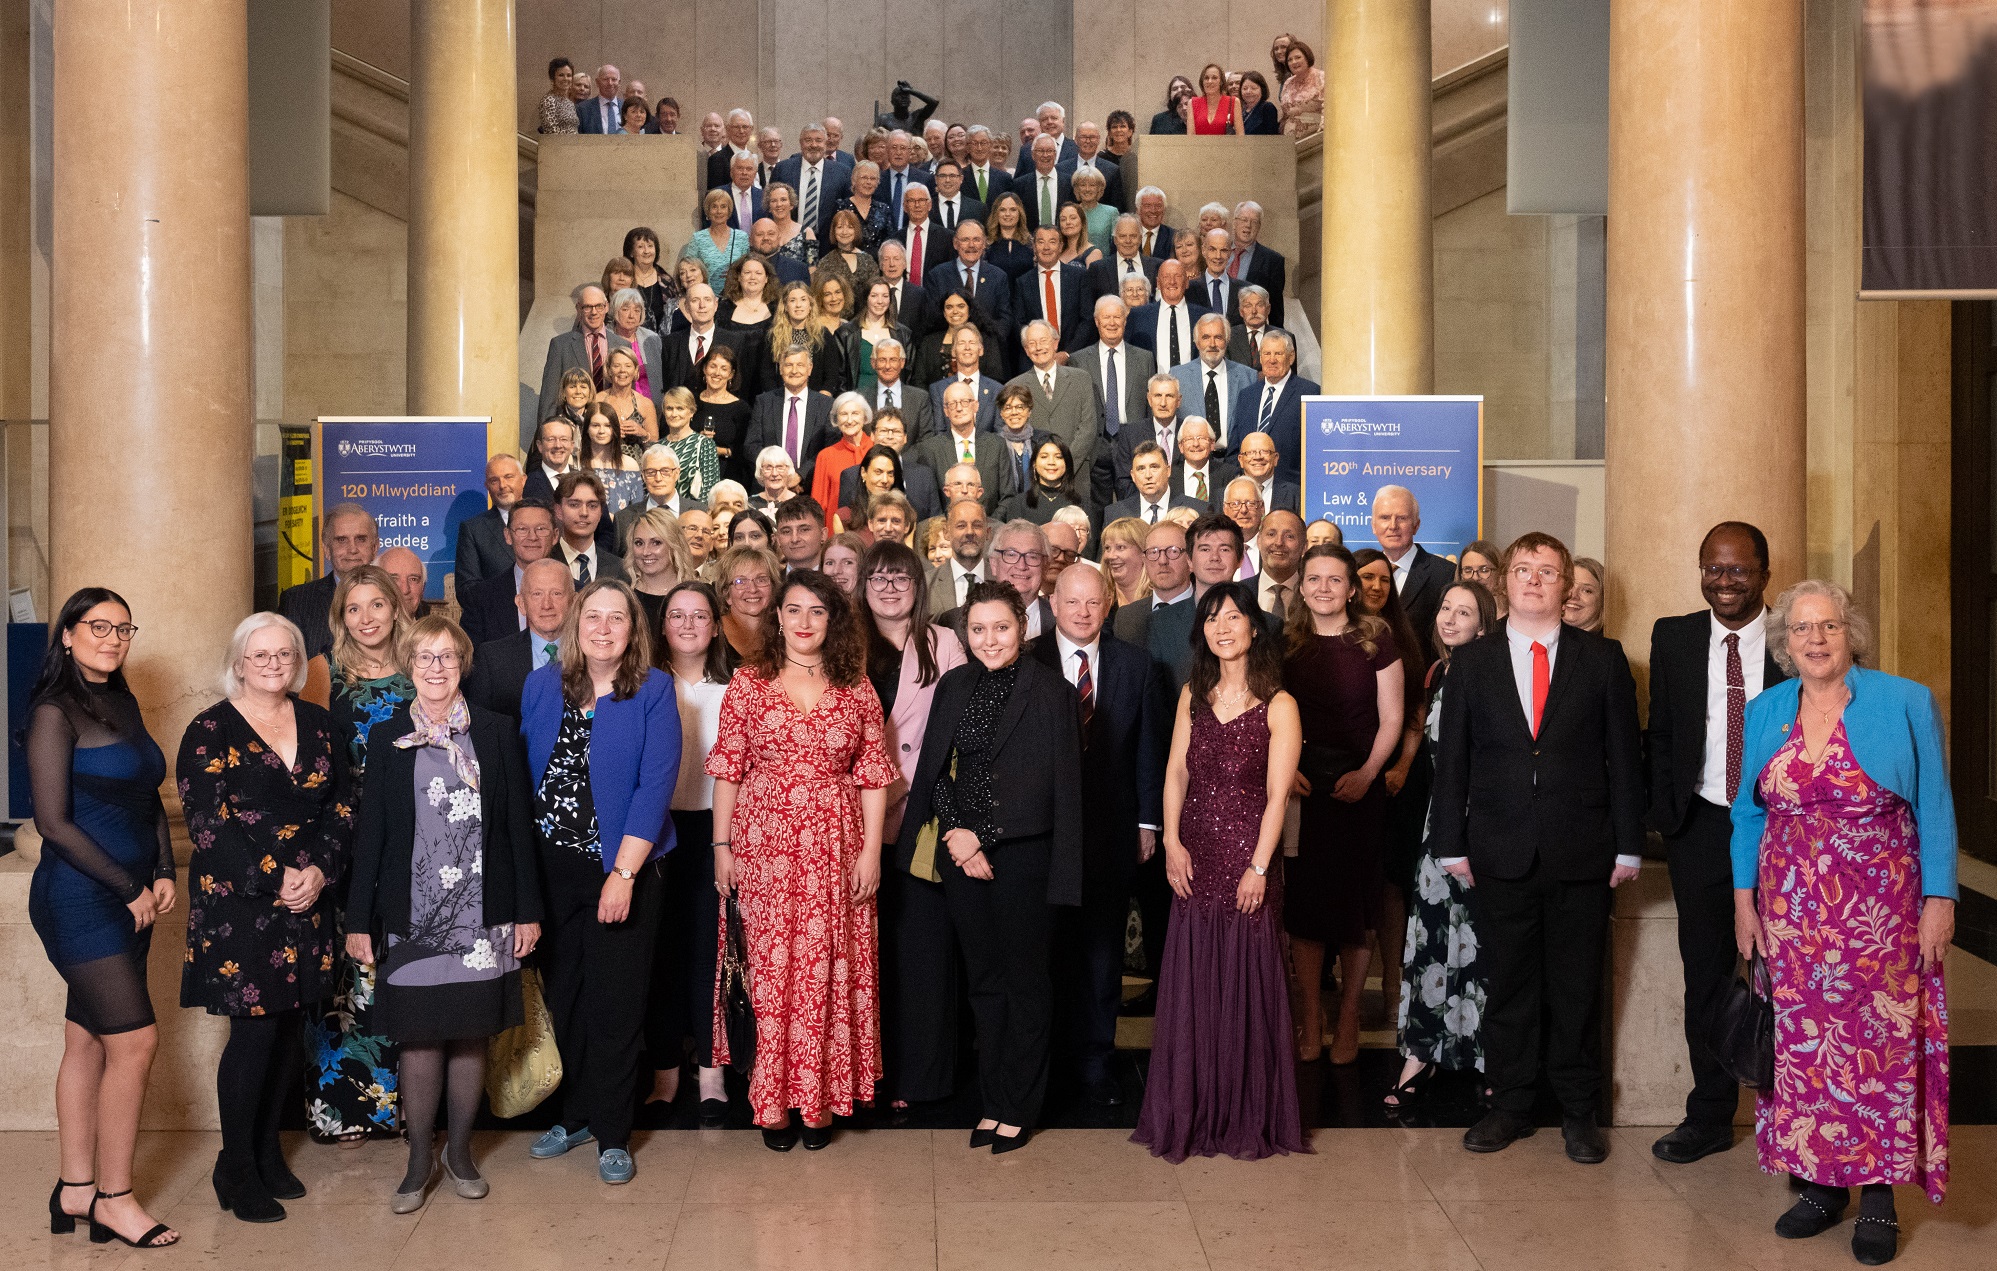 Alumni, staff, students and special guests at the event to celebrate the 120th anniversary of the teaching of law at Aberystwyth University held at the Amgueddfa Cymru - National Museum of Wales in Cardiff on Friday 10 June 2022